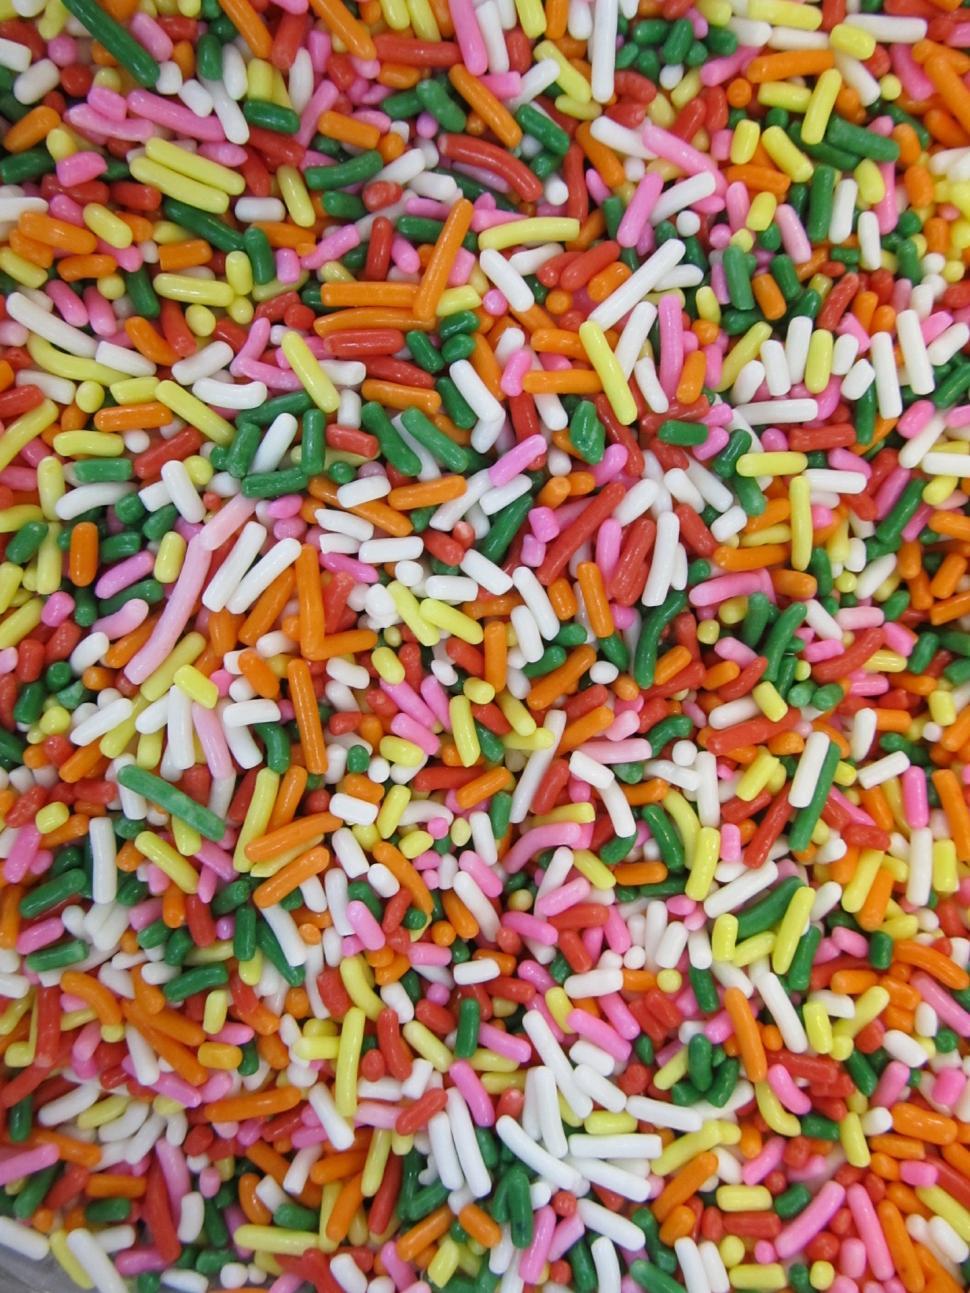 Free Image of A Pile of Sprinkles on a Table 